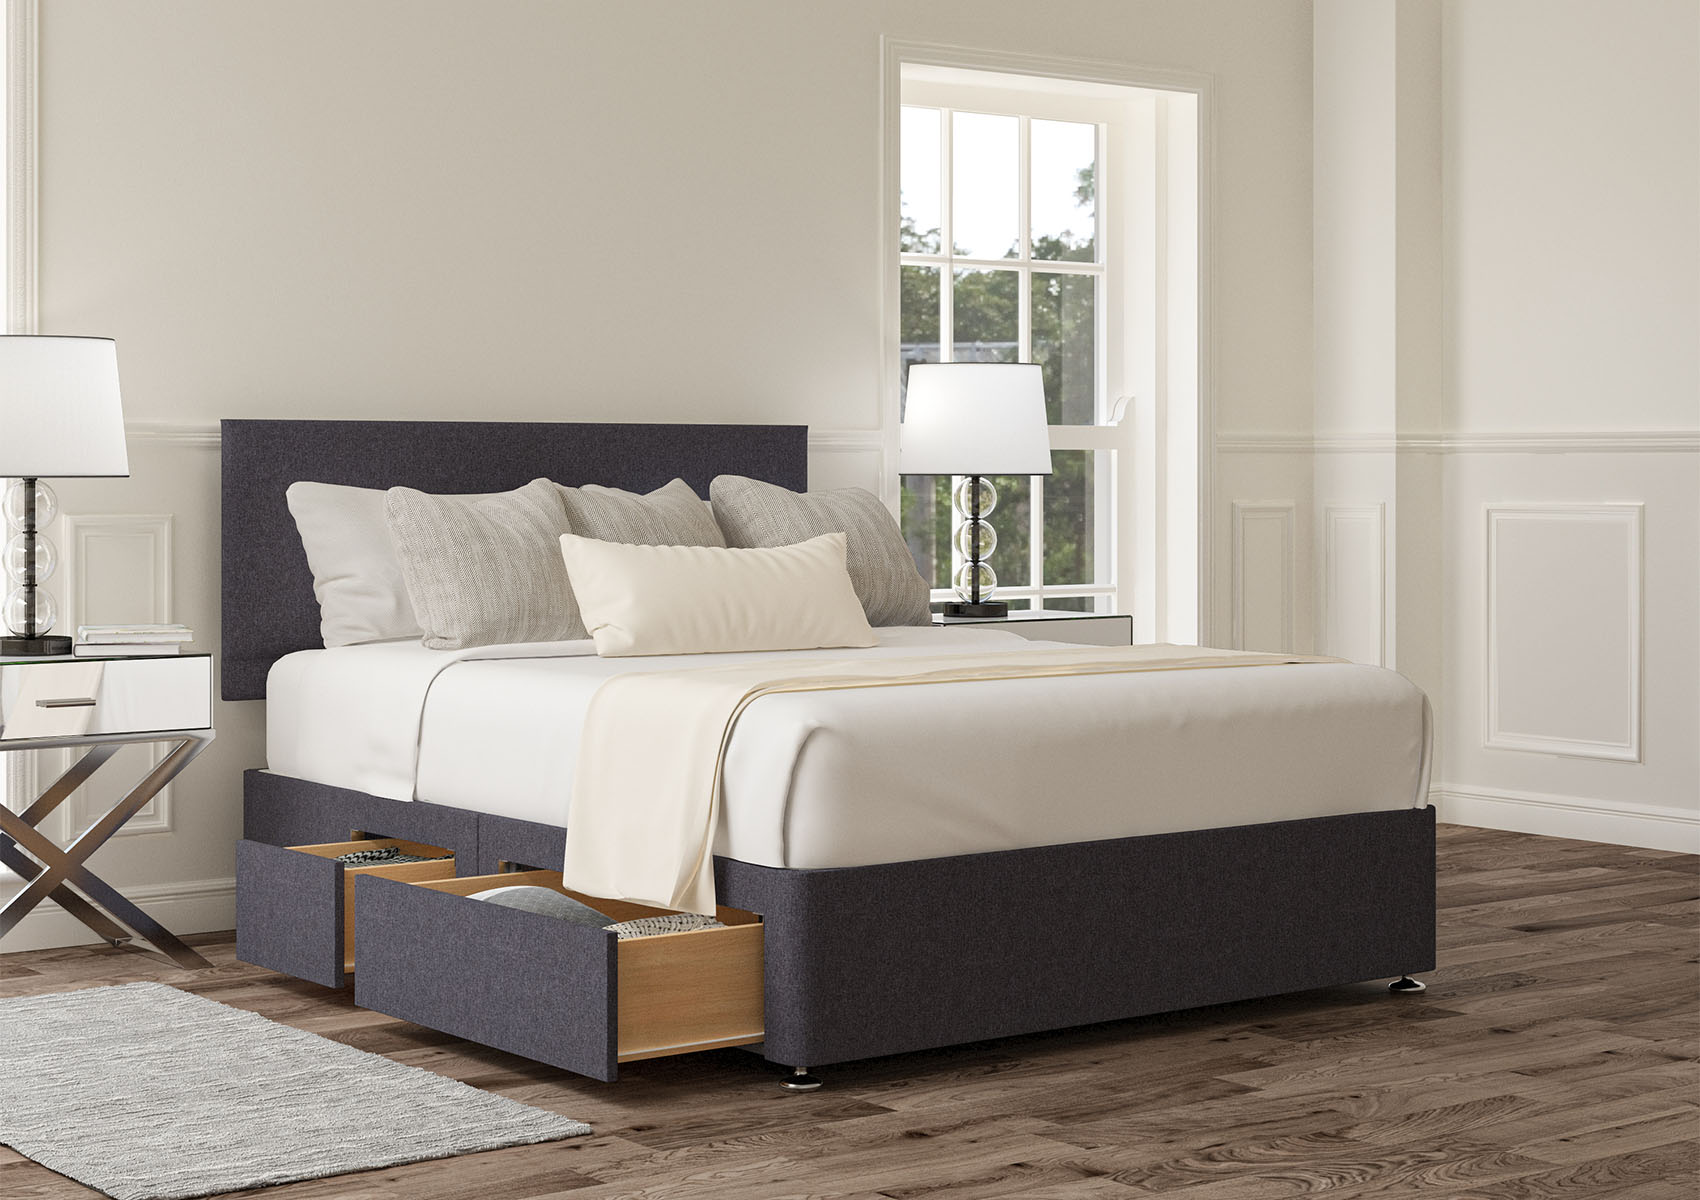 View Henley Verona Silver Upholstered King Size Divan Bed Time4Sleep information